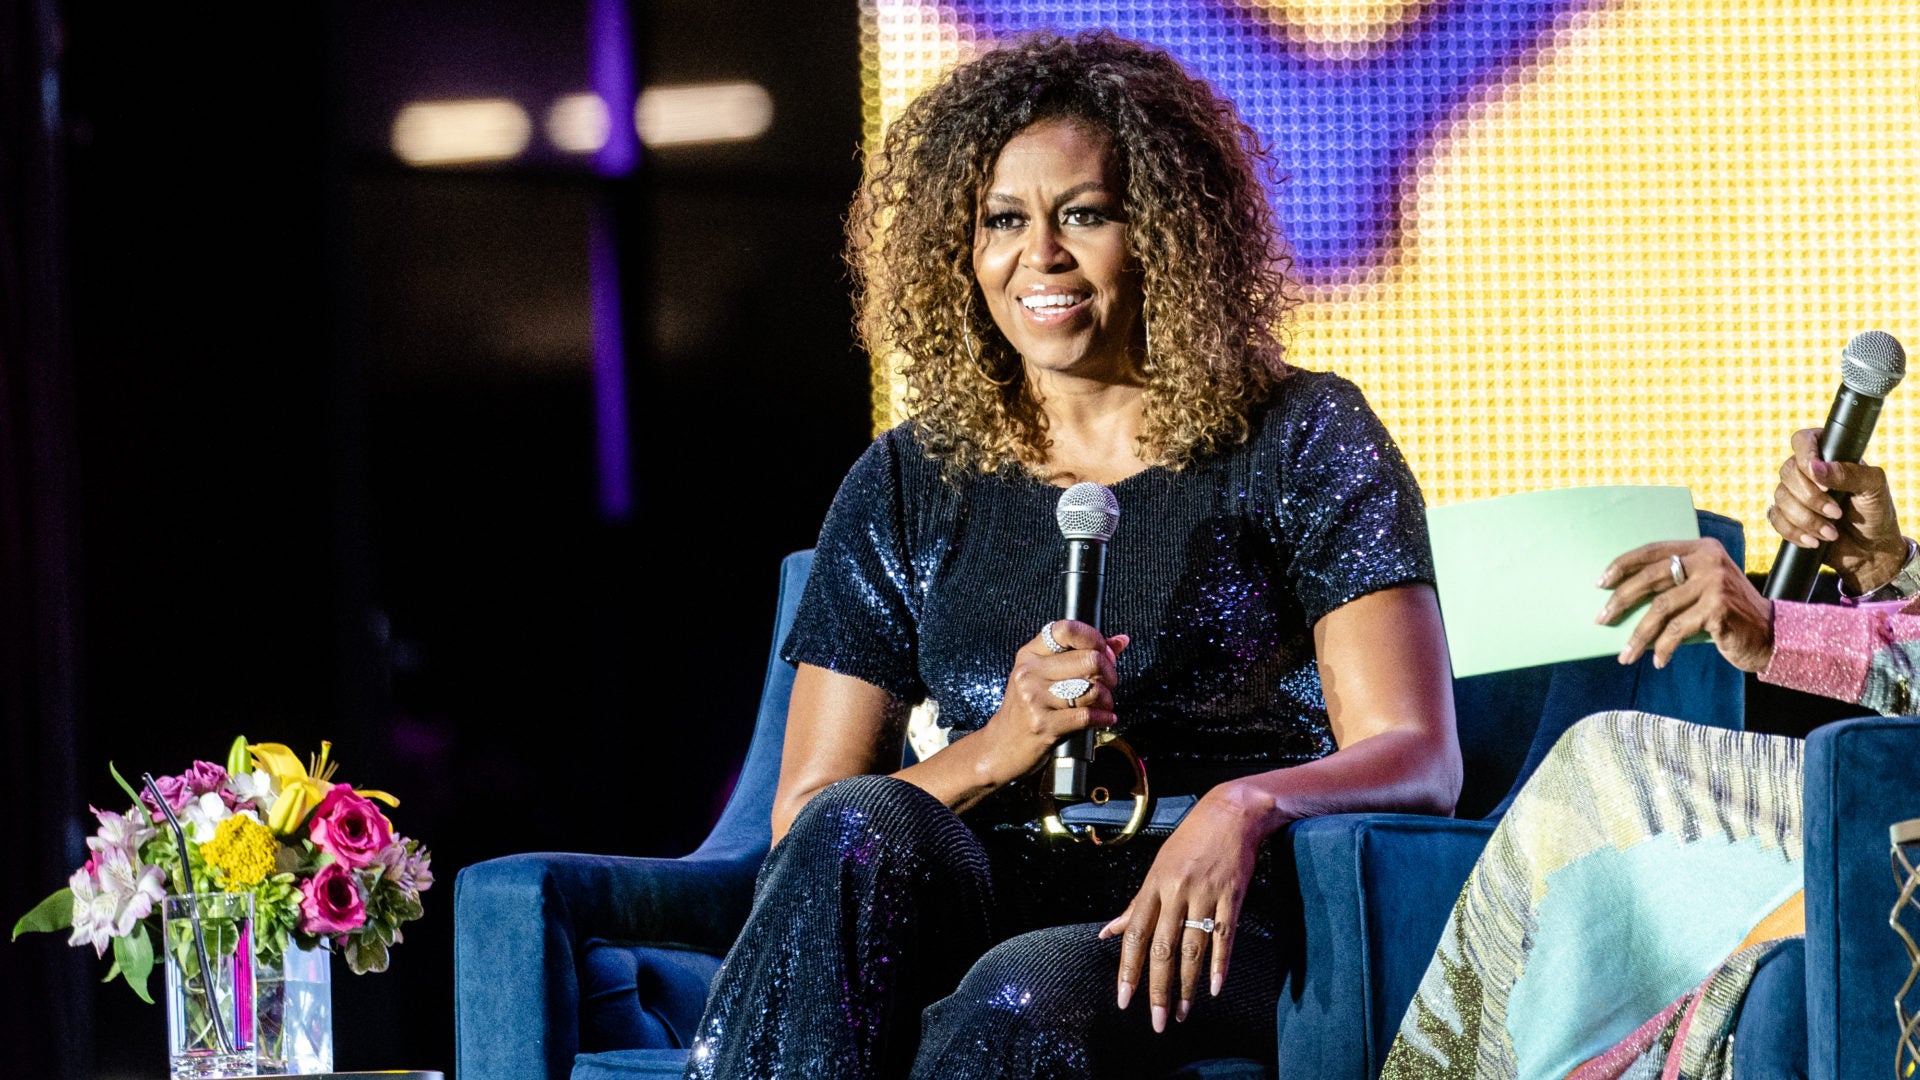 Michelle Obama Reveals Why Women Should Marry Their Equal At Essence Festival